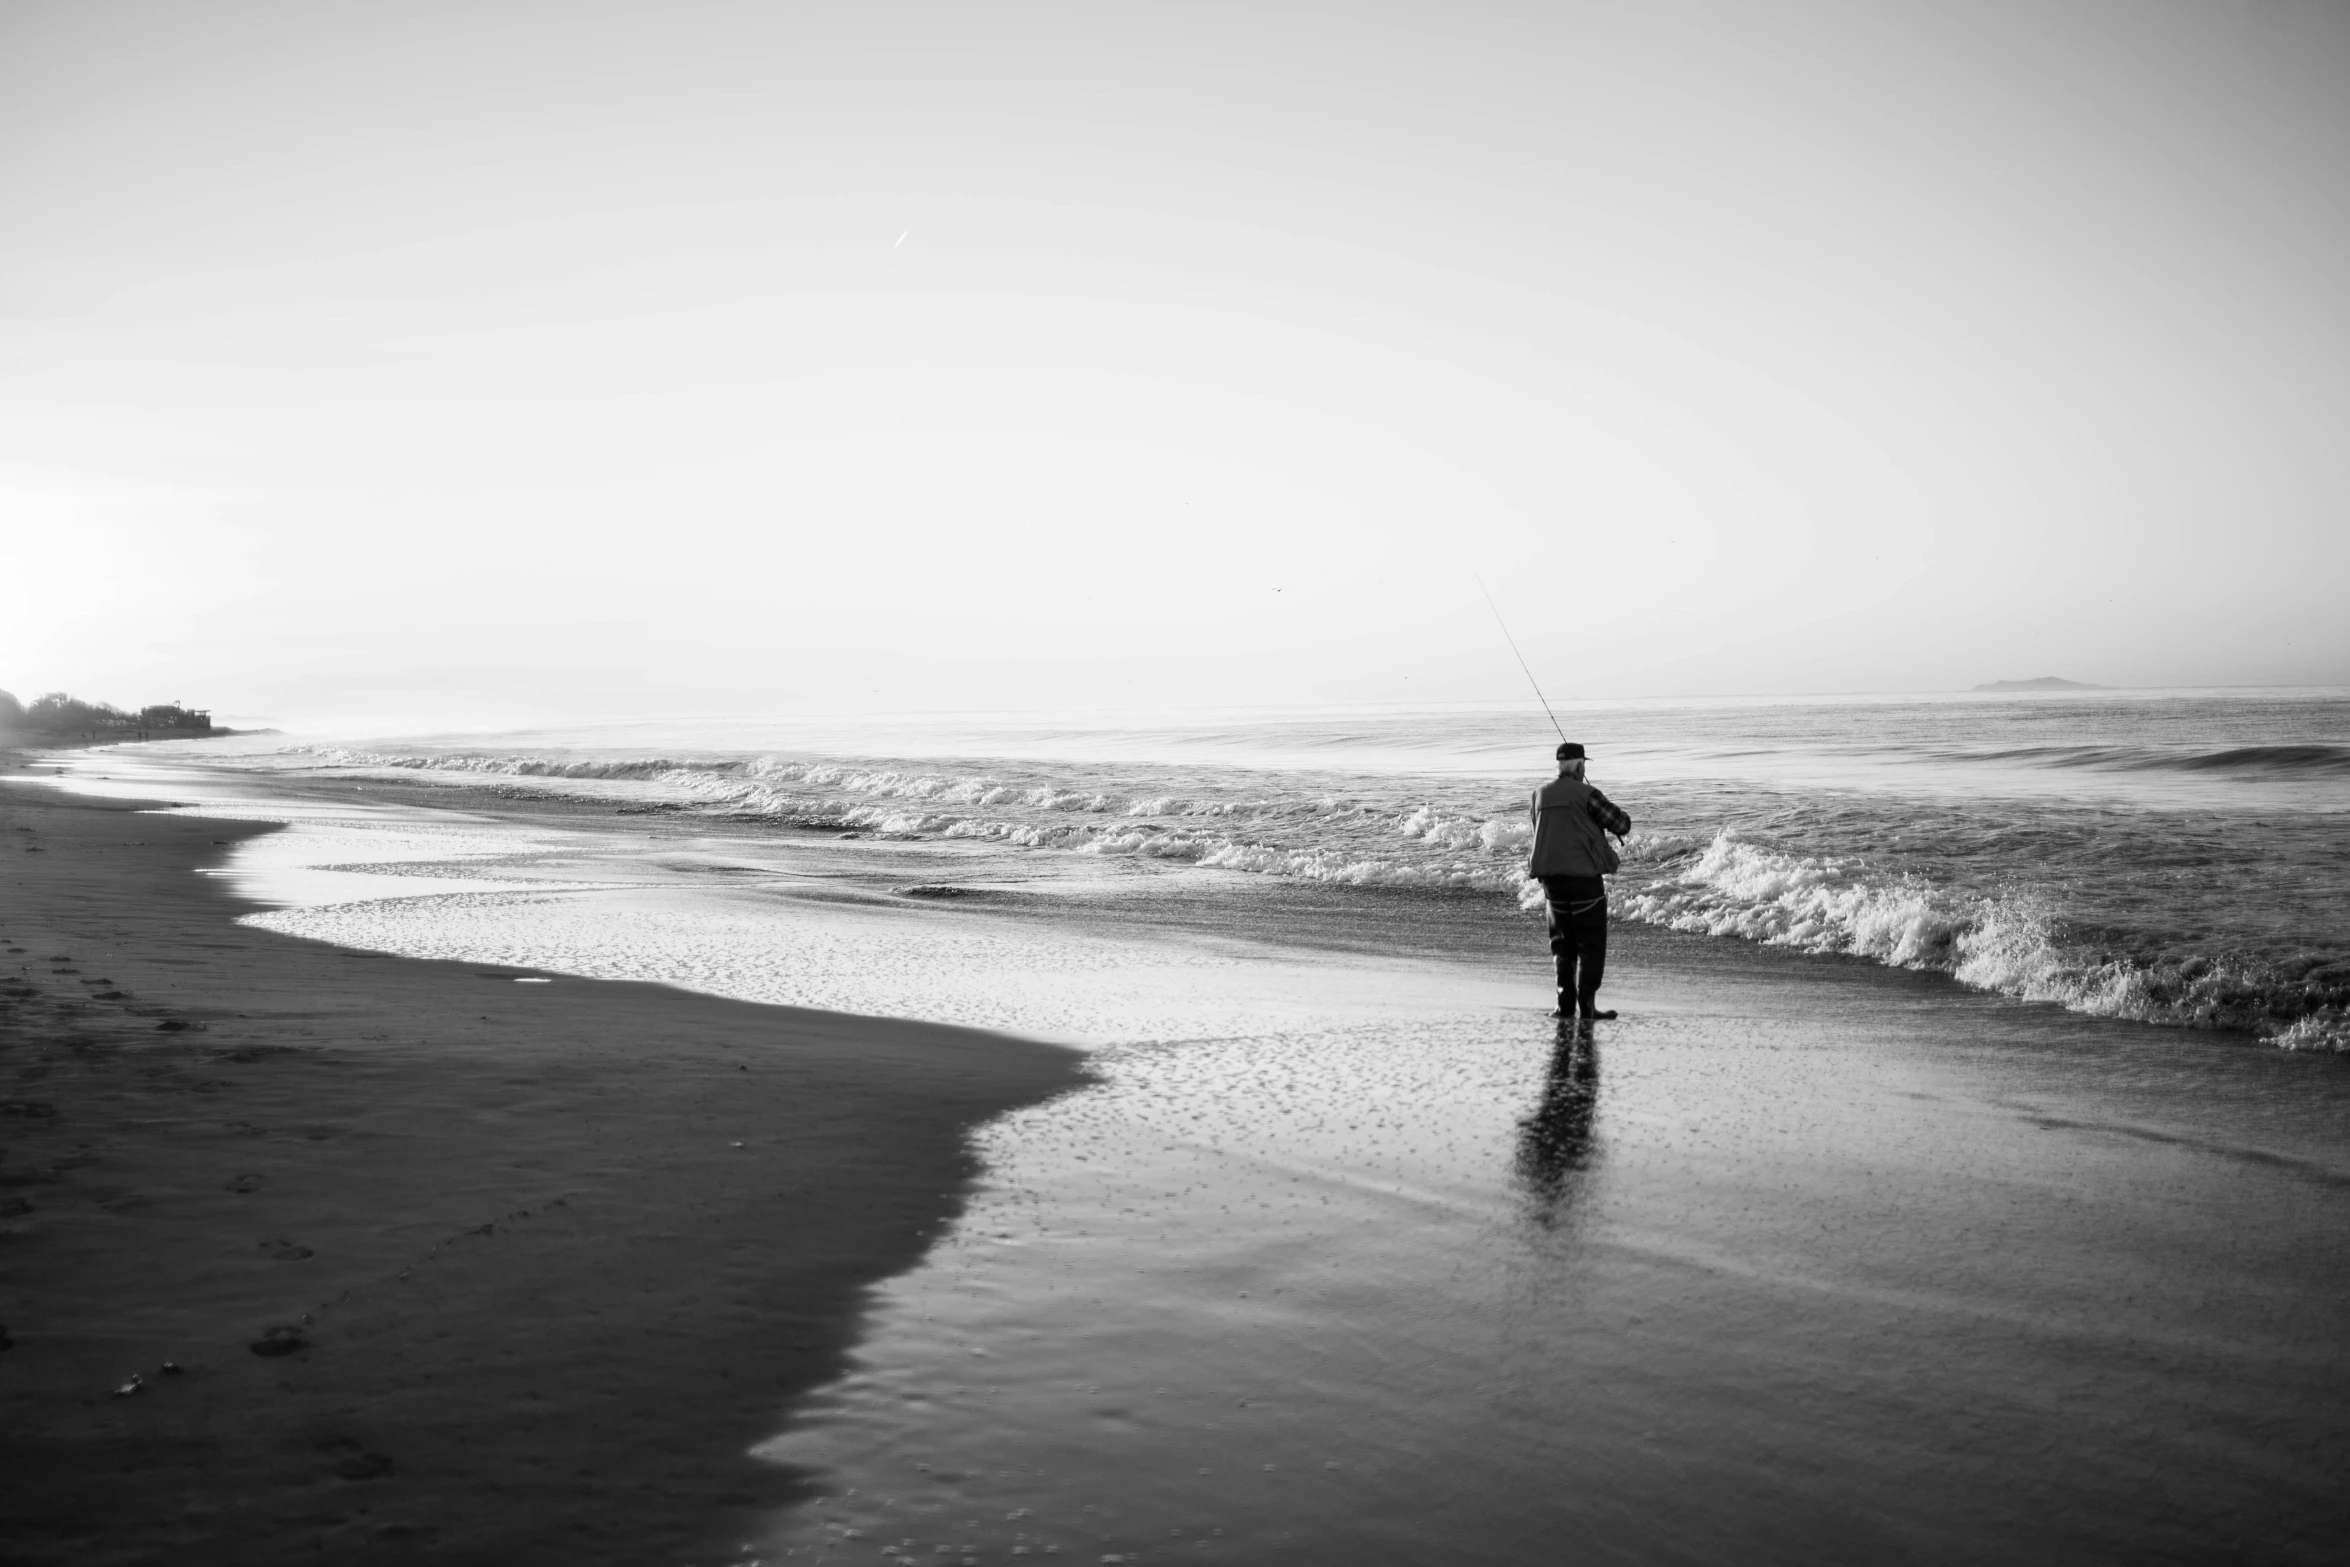 man wading along the beach holding a fish